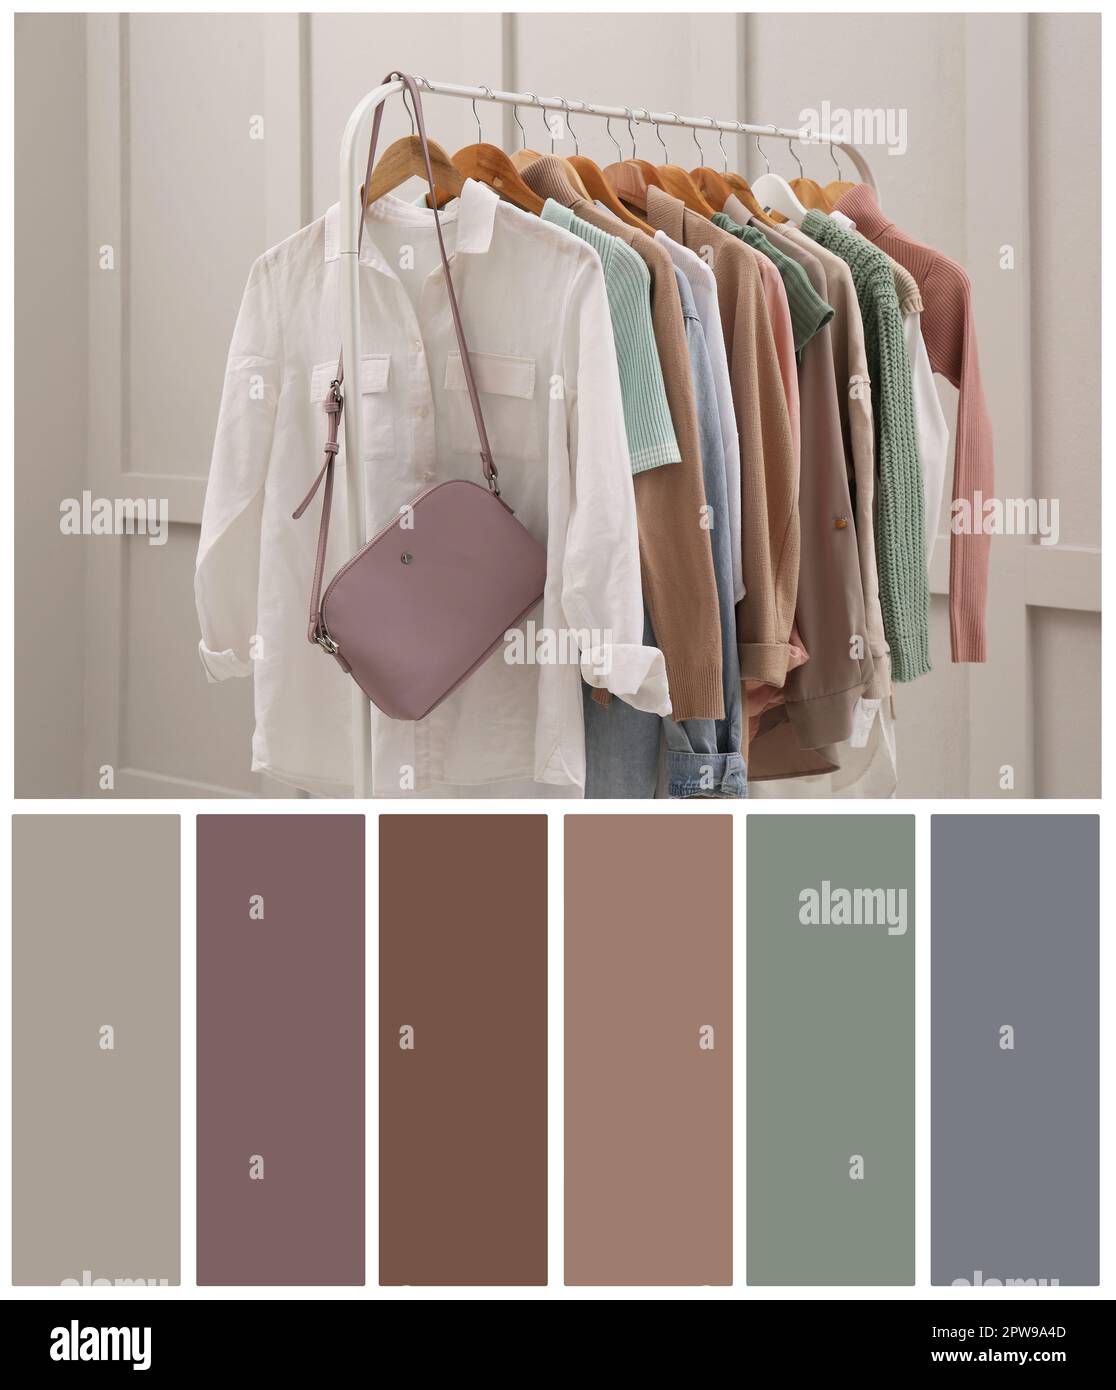 Color palette appropriate to photo of stylish women's clothes on rack in room Stock Photo